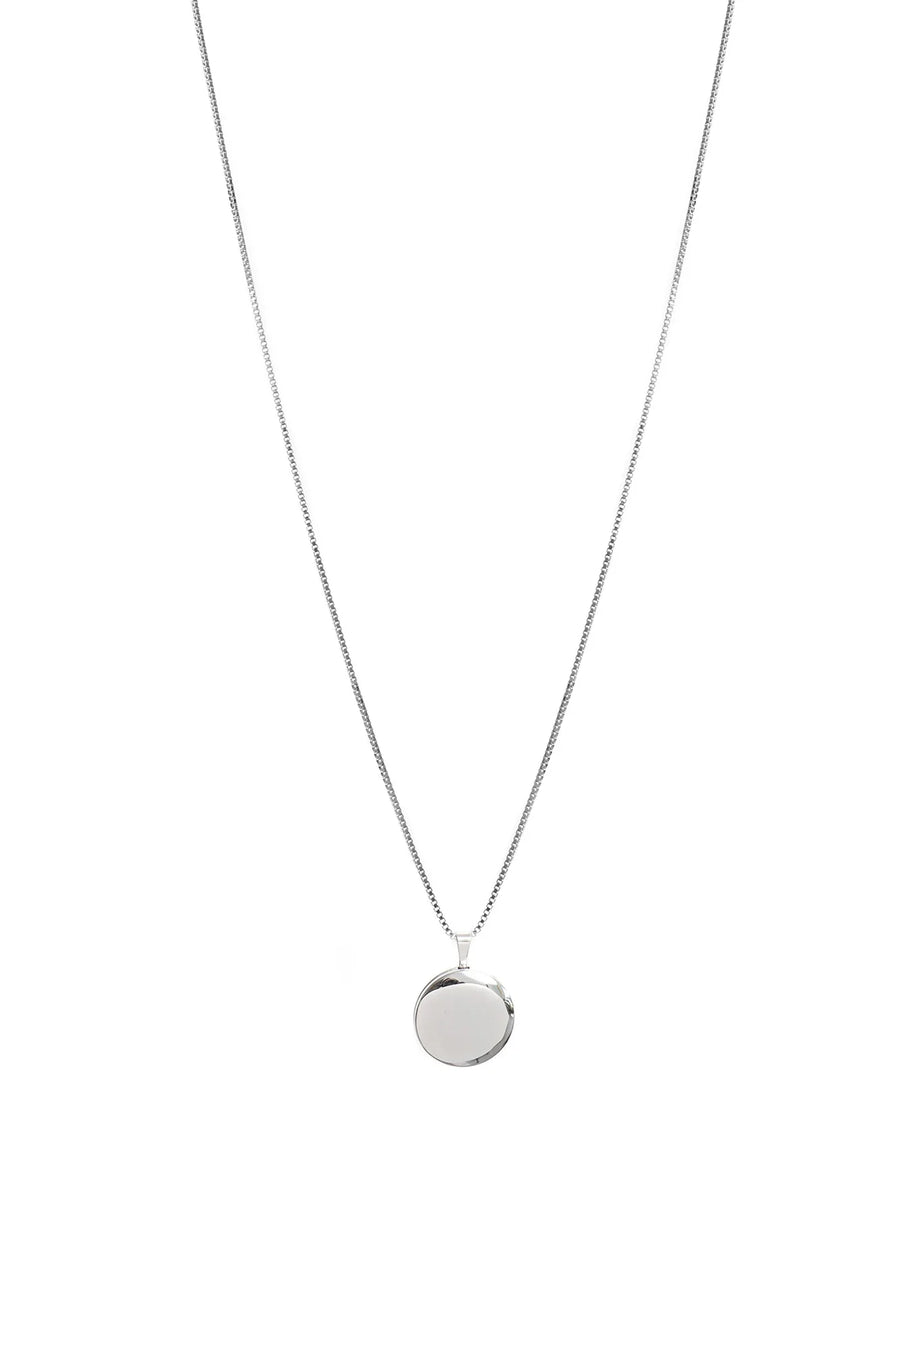 LISBETH JEWELRY - CLASSIC LOCKET NECKLACE  - STERLING SILVER